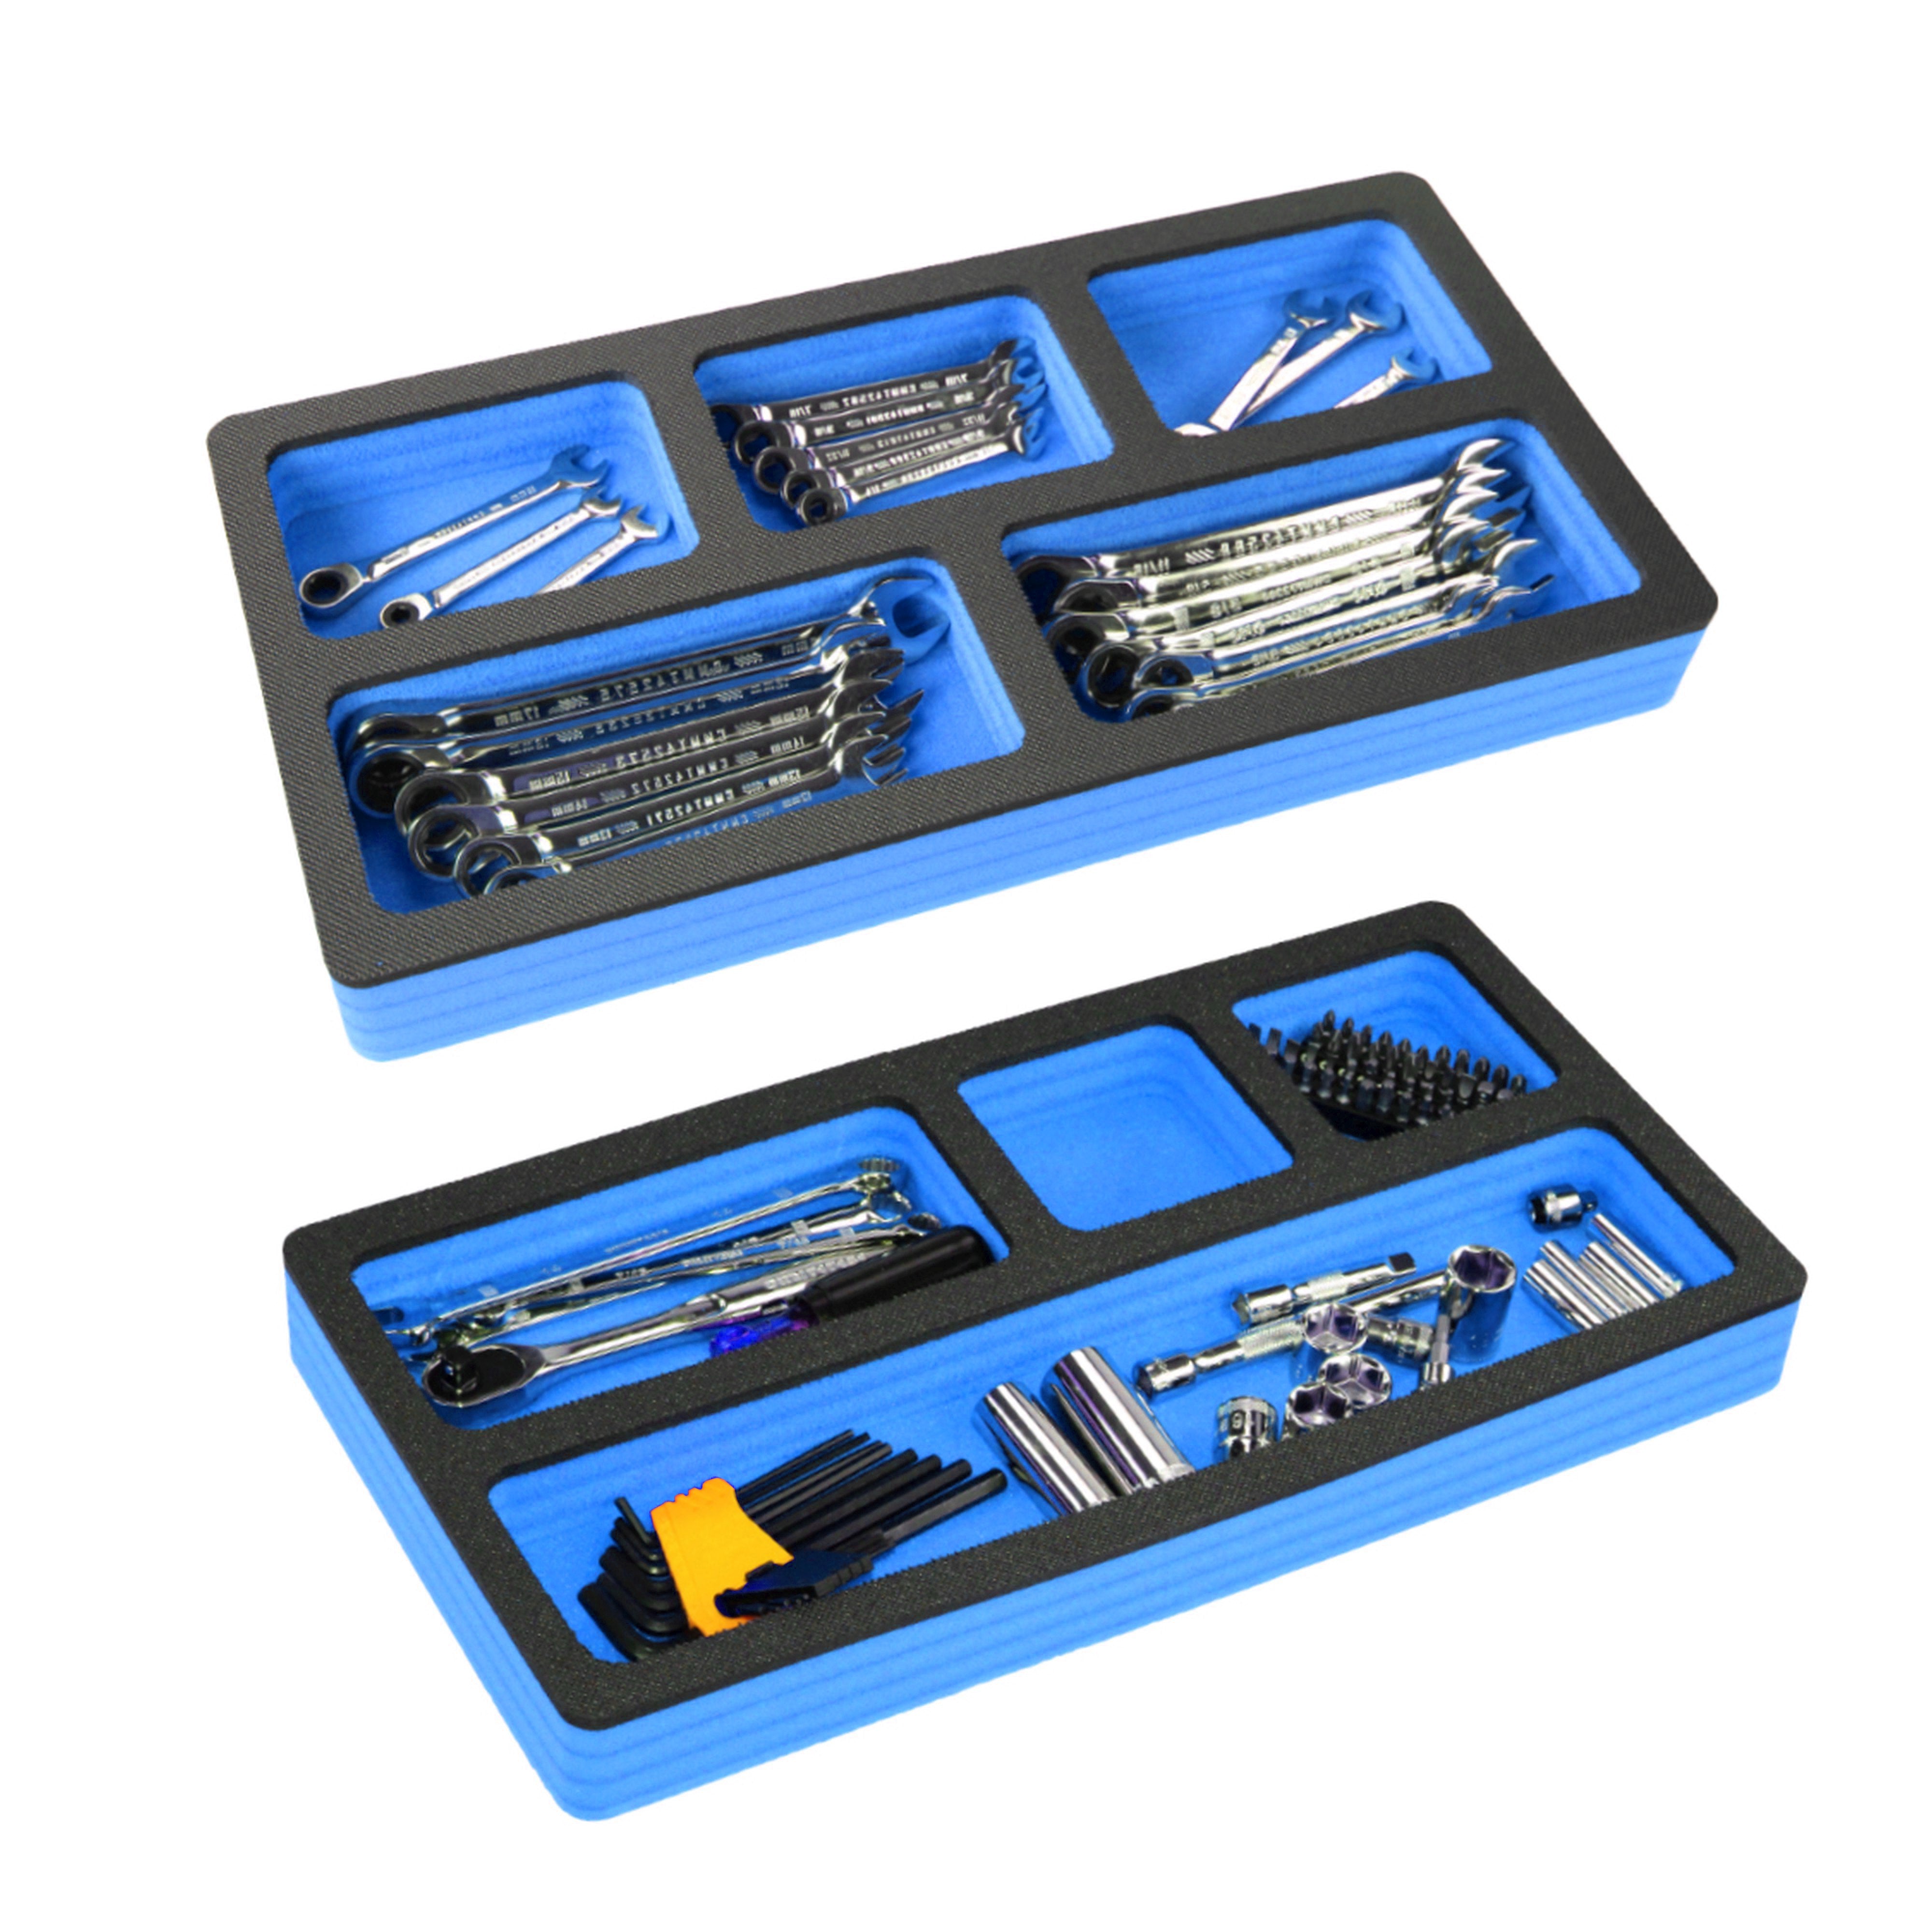 Tool Drawer Organizer 2-Piece Insert Set Blue and Black Durable Foam Non-Slip Anti-Rattle Bin Holder Tray 20 x 10 Inch Large Pockets Fits Craftsman Husky Kobalt Milwaukee and Many Others